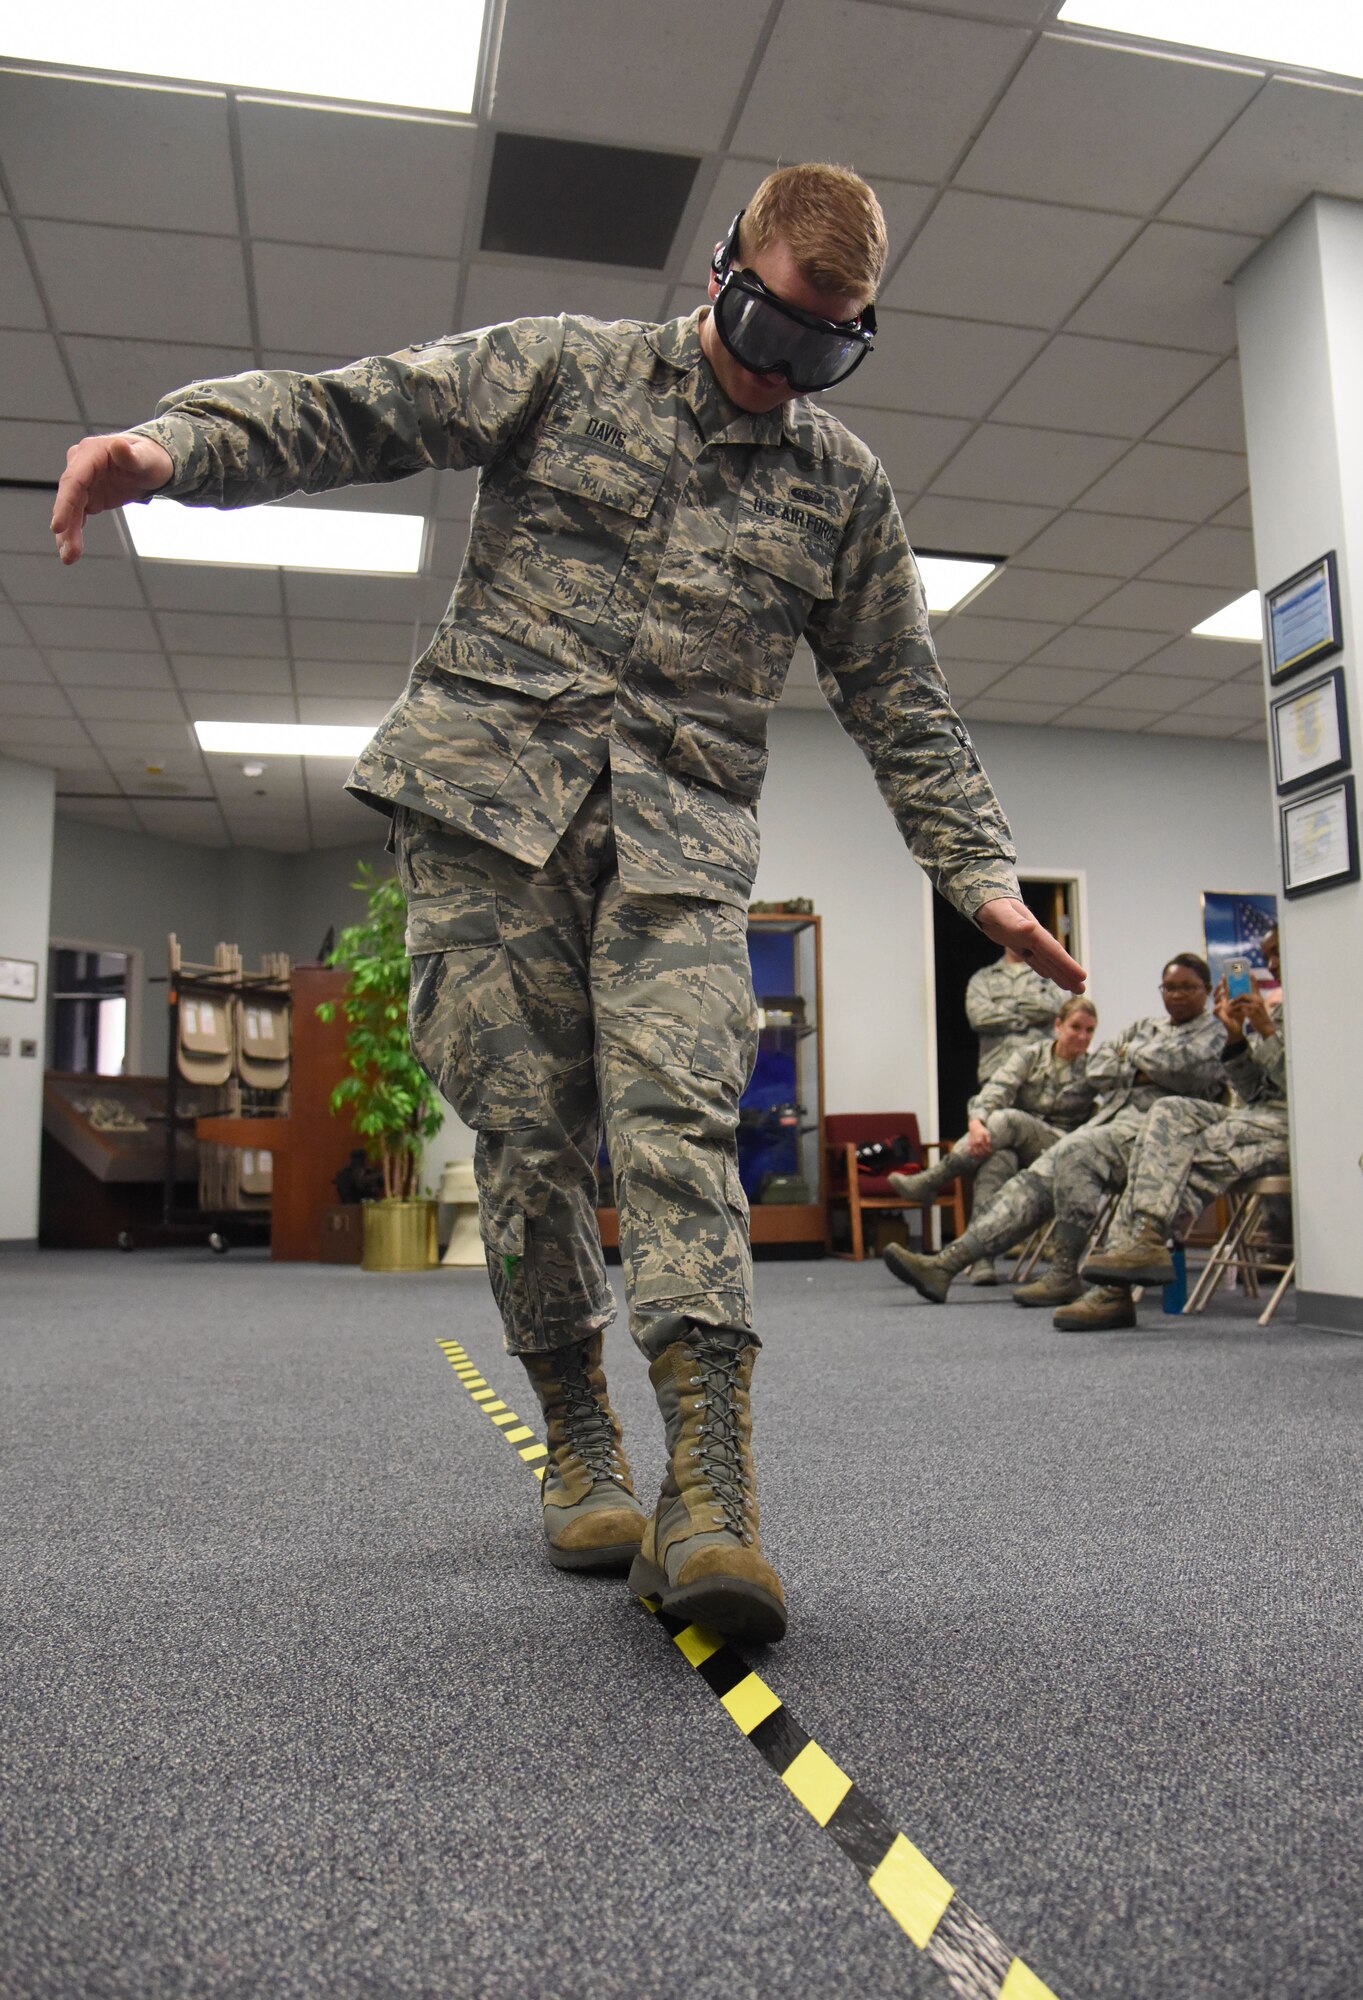 Airman 1st Class Larry Davis, 81st Communications Squadron client systems technician, is subjected to a field sobriety test while wearing drunk goggles during an alcohol awareness briefing at the 81st CS Dec. 19, 2017, on Keesler Air Force Base, Mississippi. December is Impaired Driving Awareness Month. More than 200 people were killed in Mississippi last year in drunk driving related incidents. (U.S. Air Force photo by Kemberly Groue)